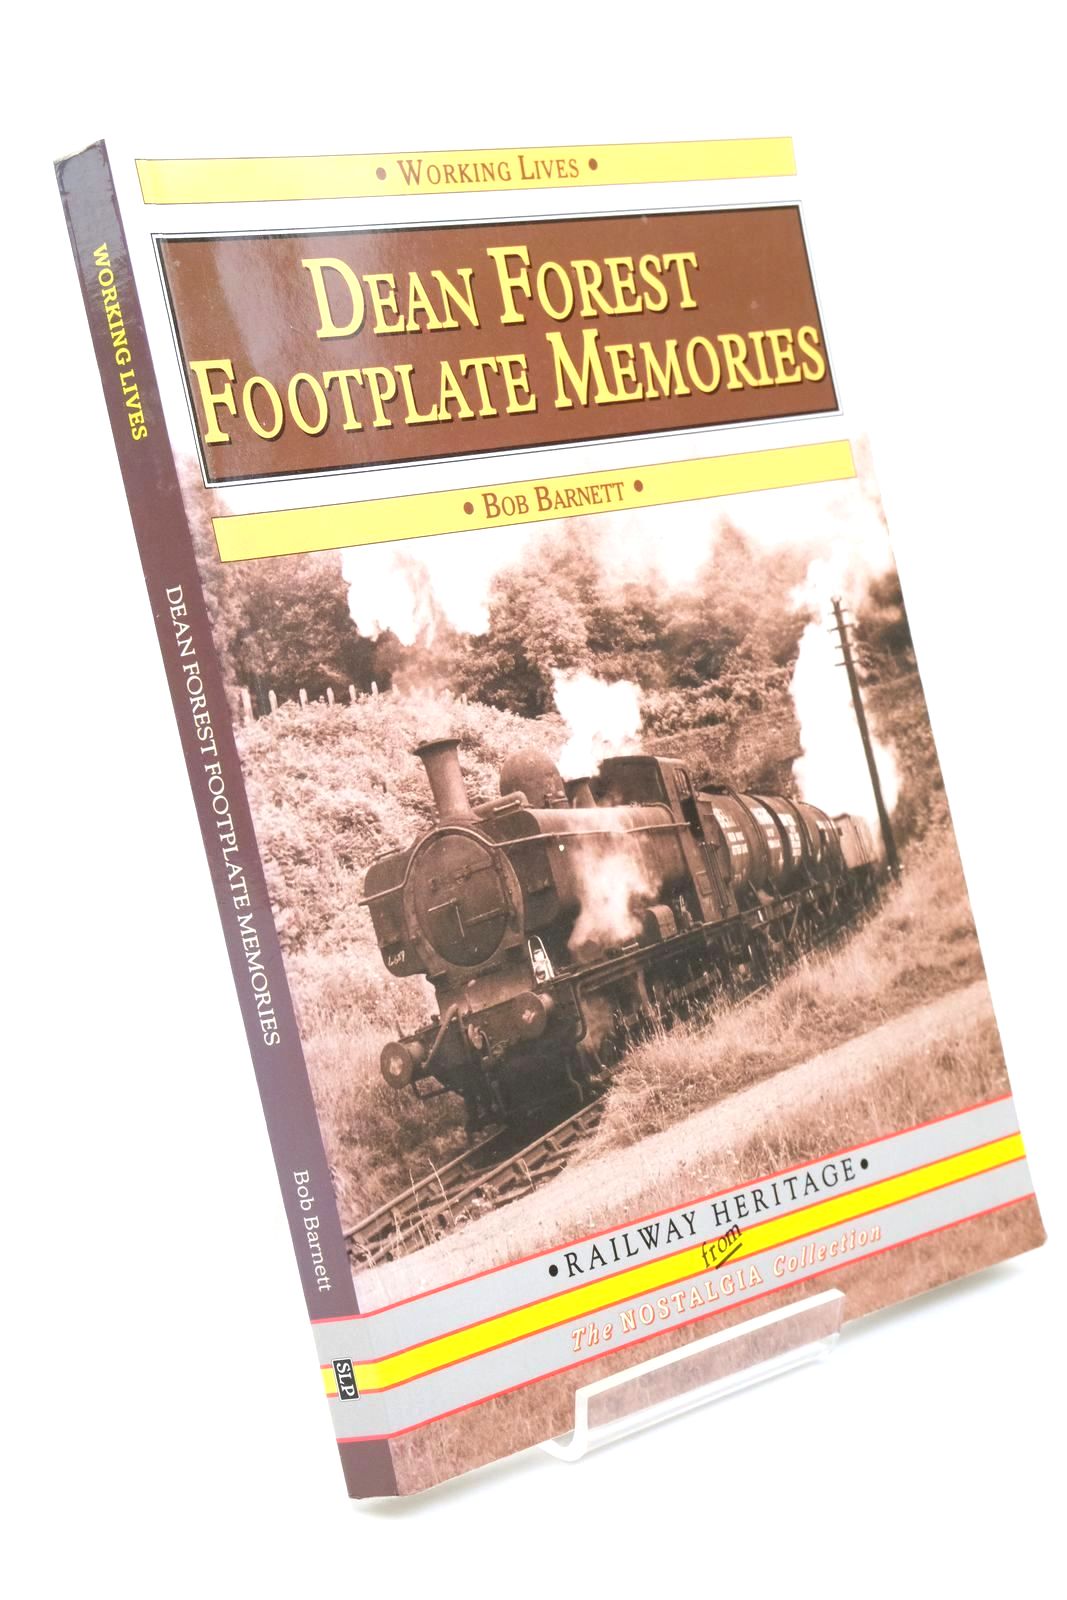 Photo of DEAN FOREST FOOTPLATE MEMORIES- Stock Number: 1322807